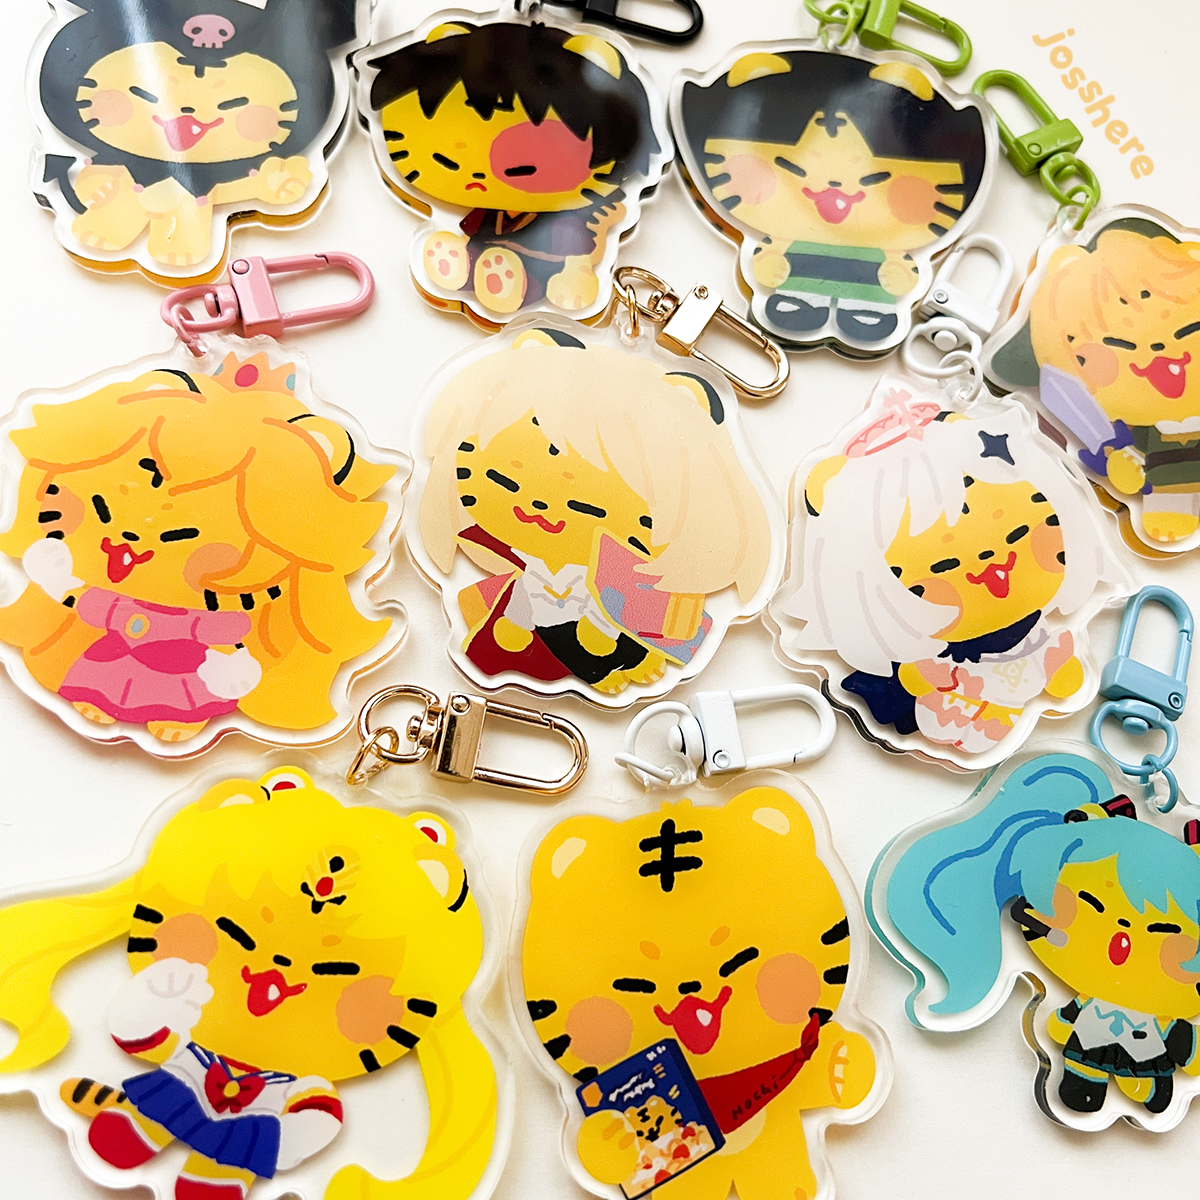 It's NOT Hochi - Acrylic Charms